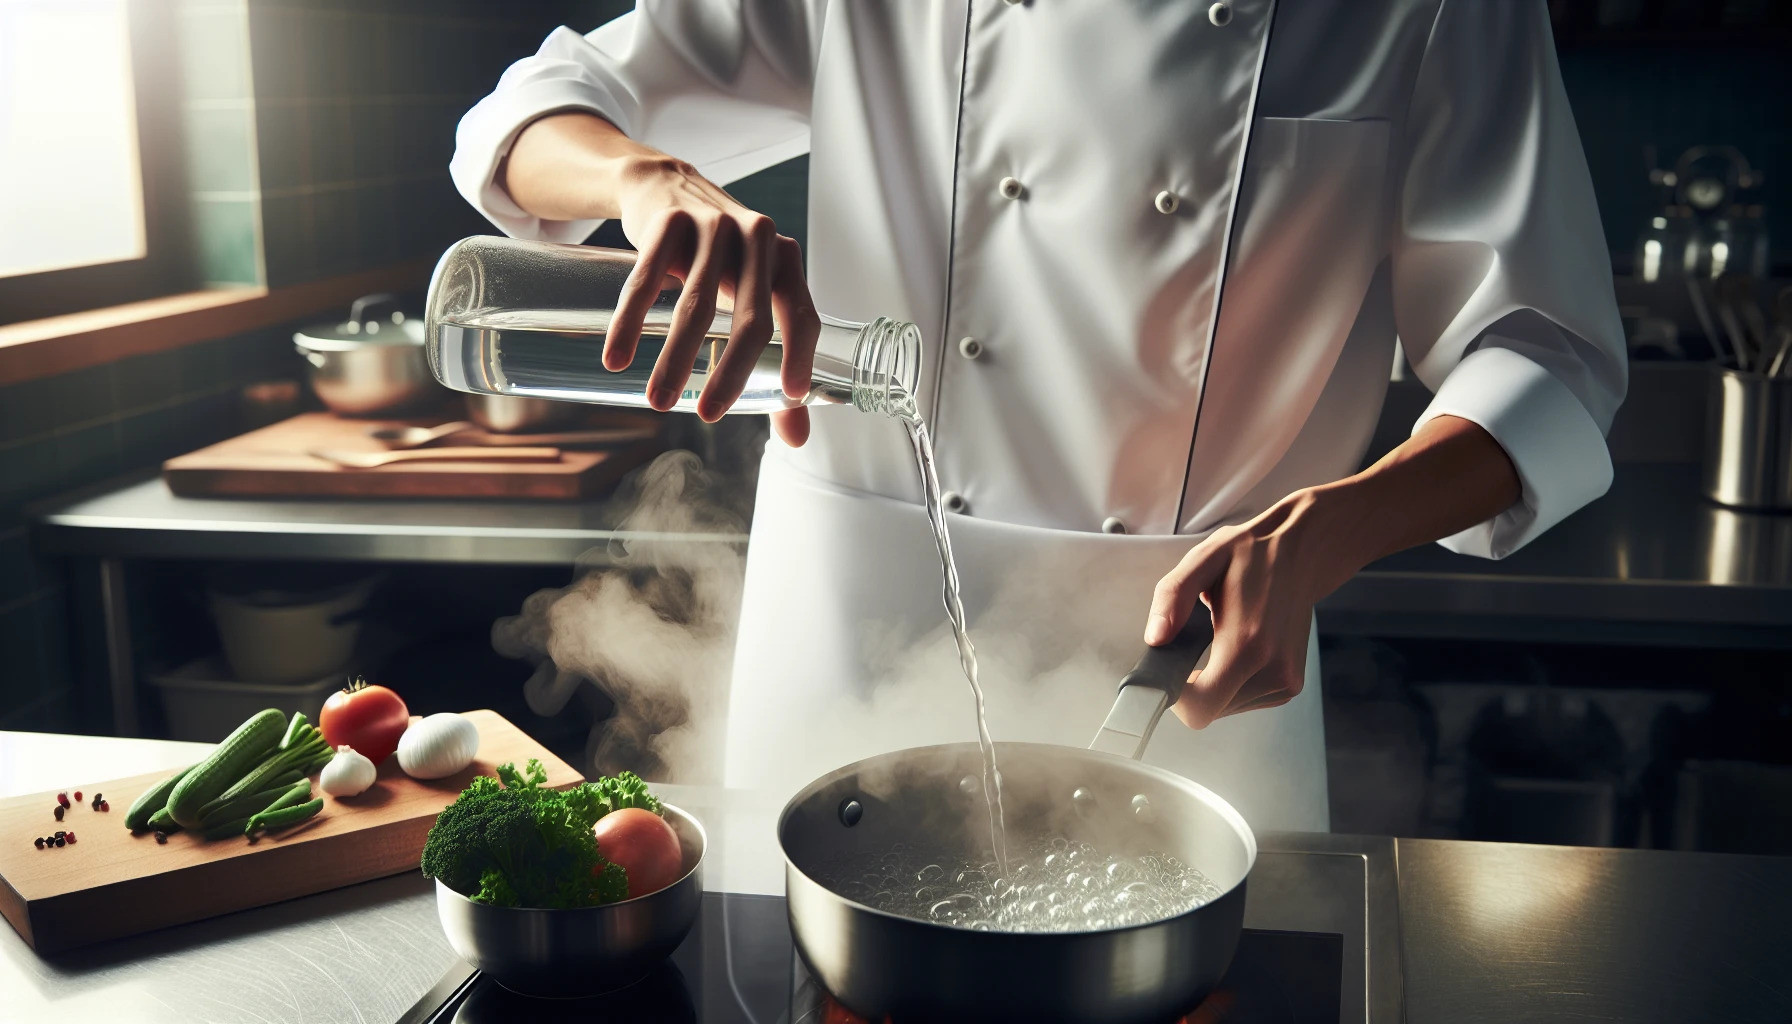 Chef using distilled water in cooking